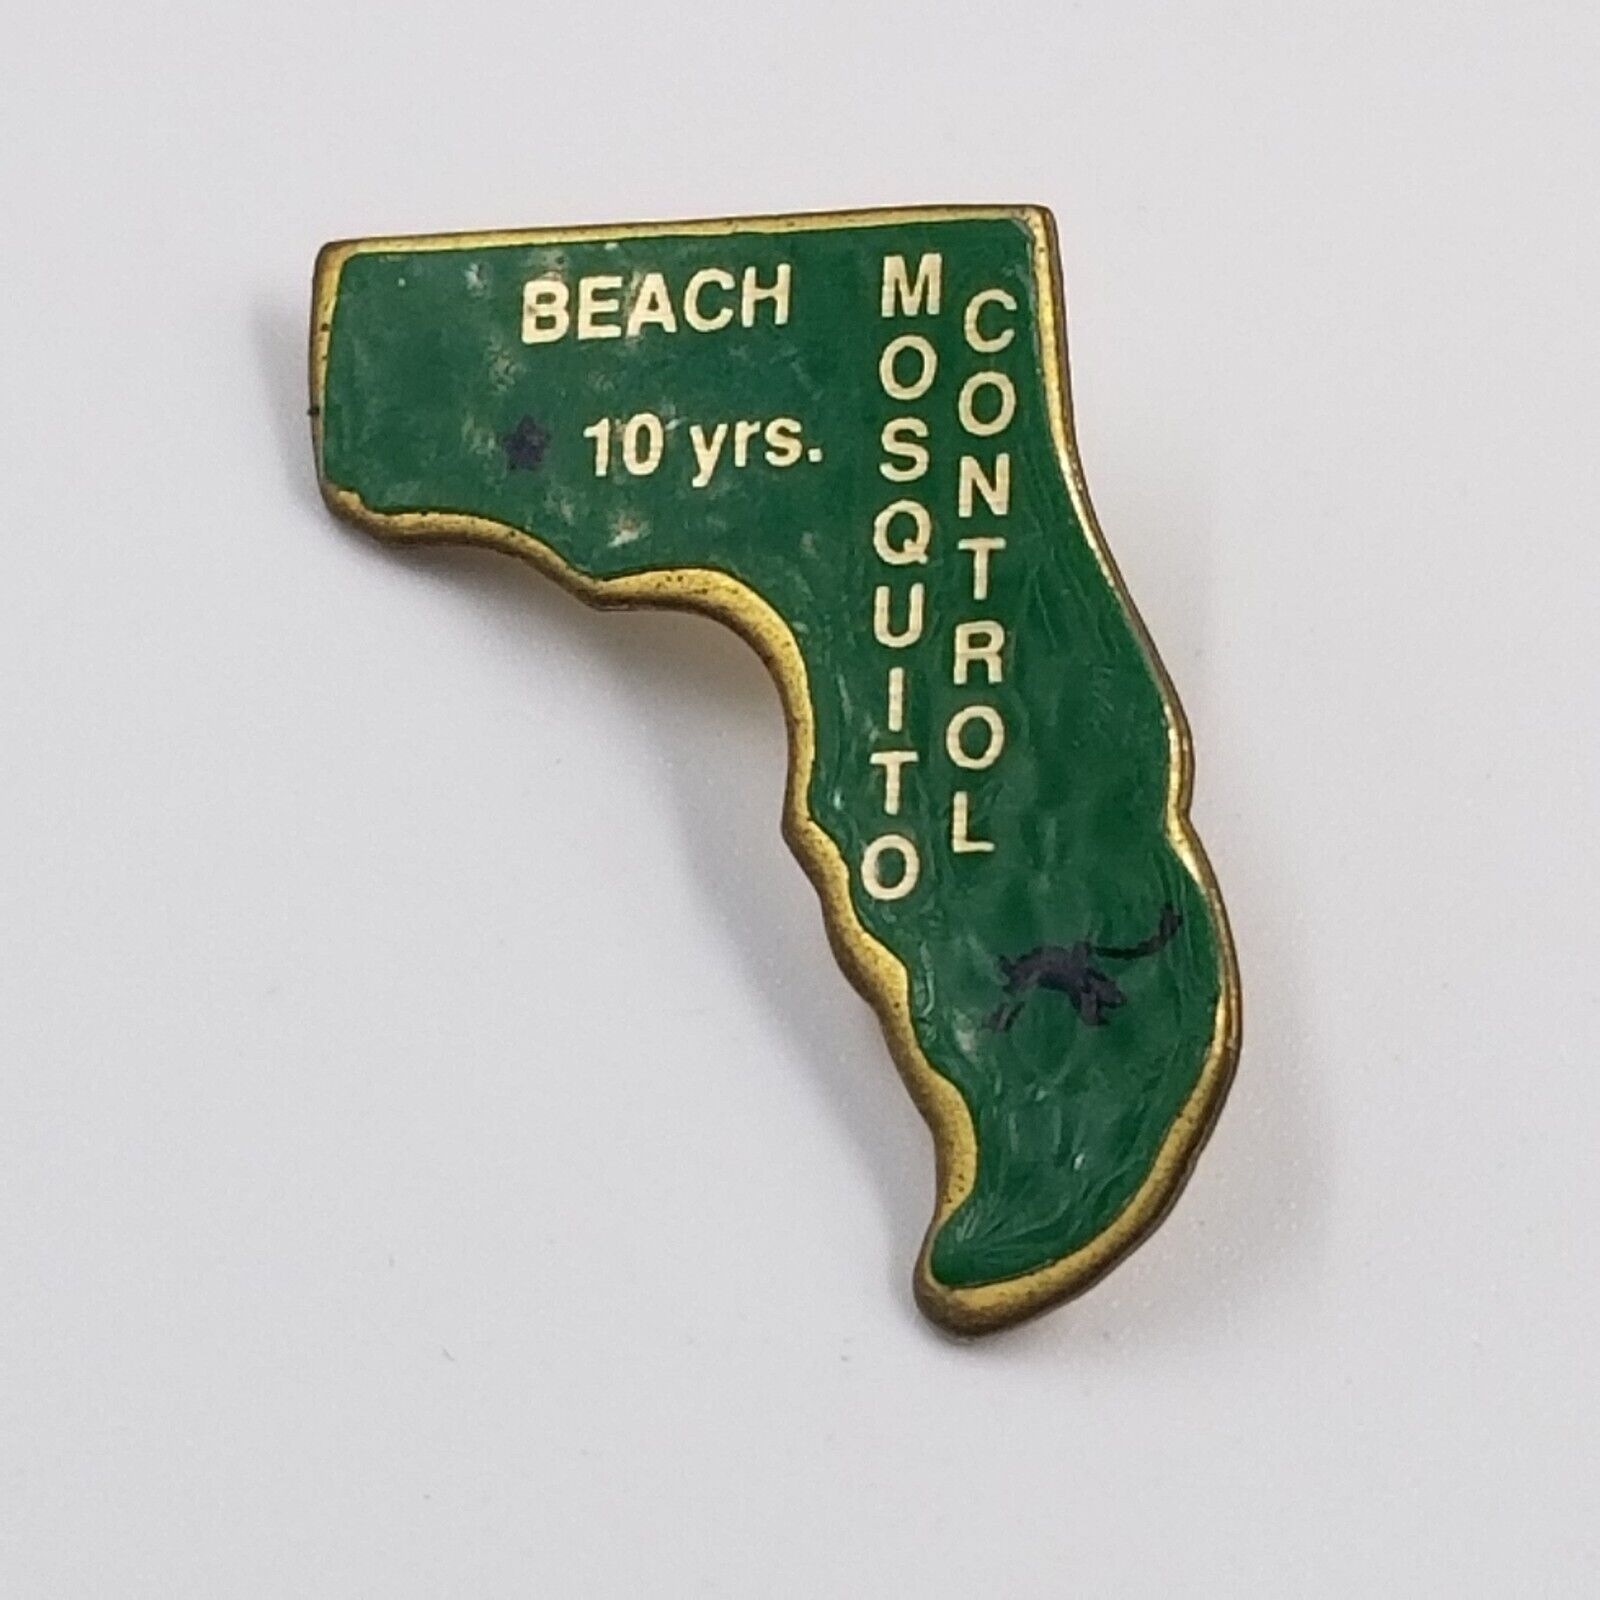 VTG Florida State Map Beach Mosquito Control 10 Years Lapel Pin Union Made USA